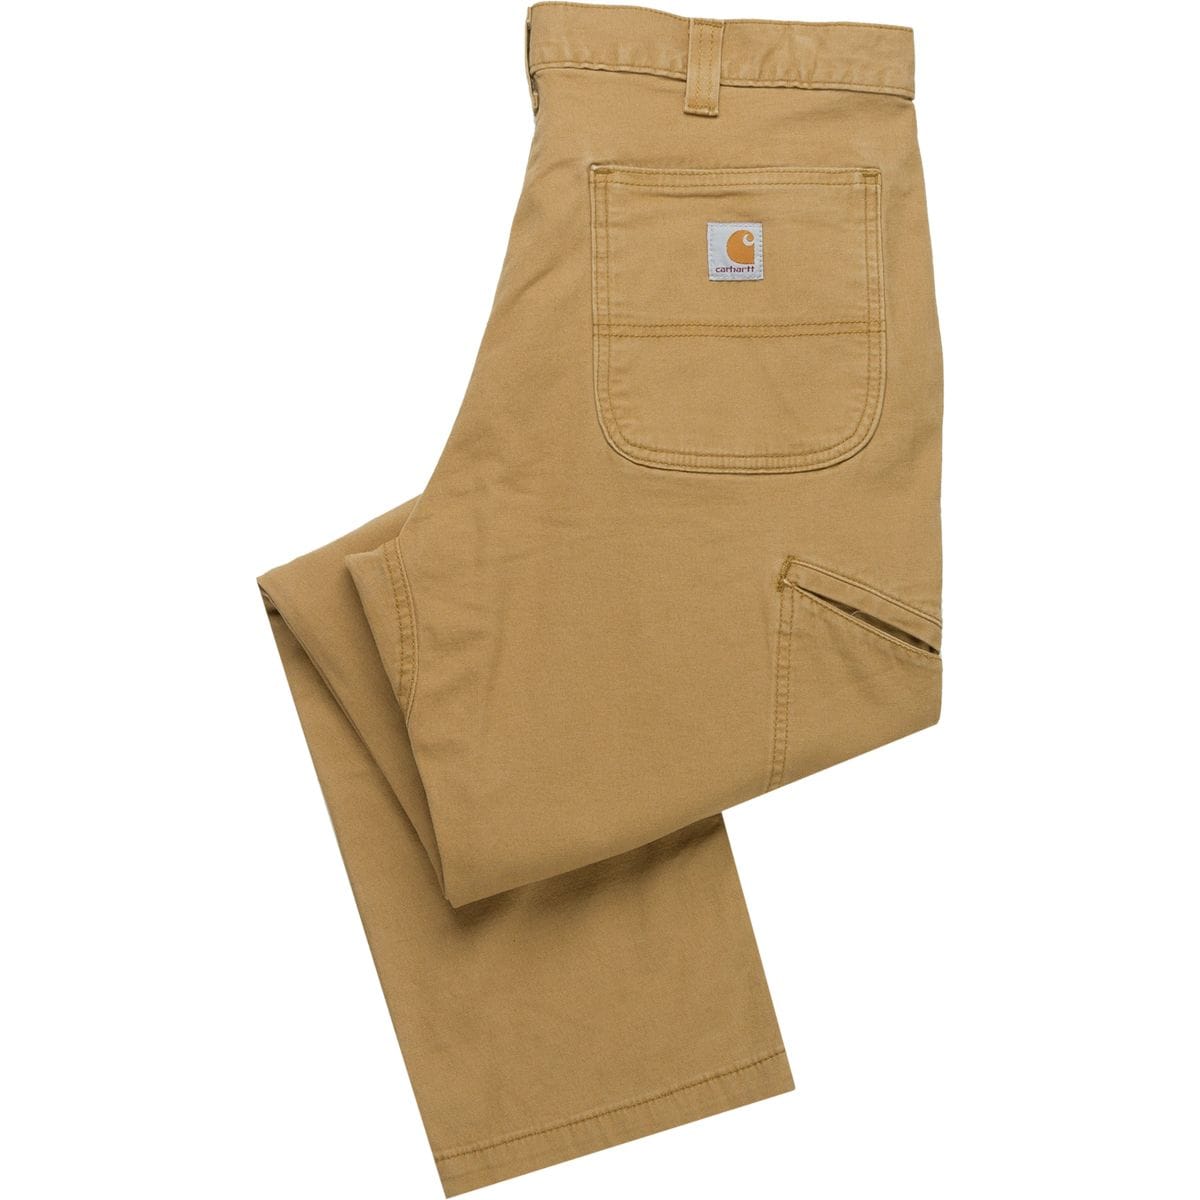 Carhartt Men's Rugged Flex Rigby Double Front Work Utility Pants